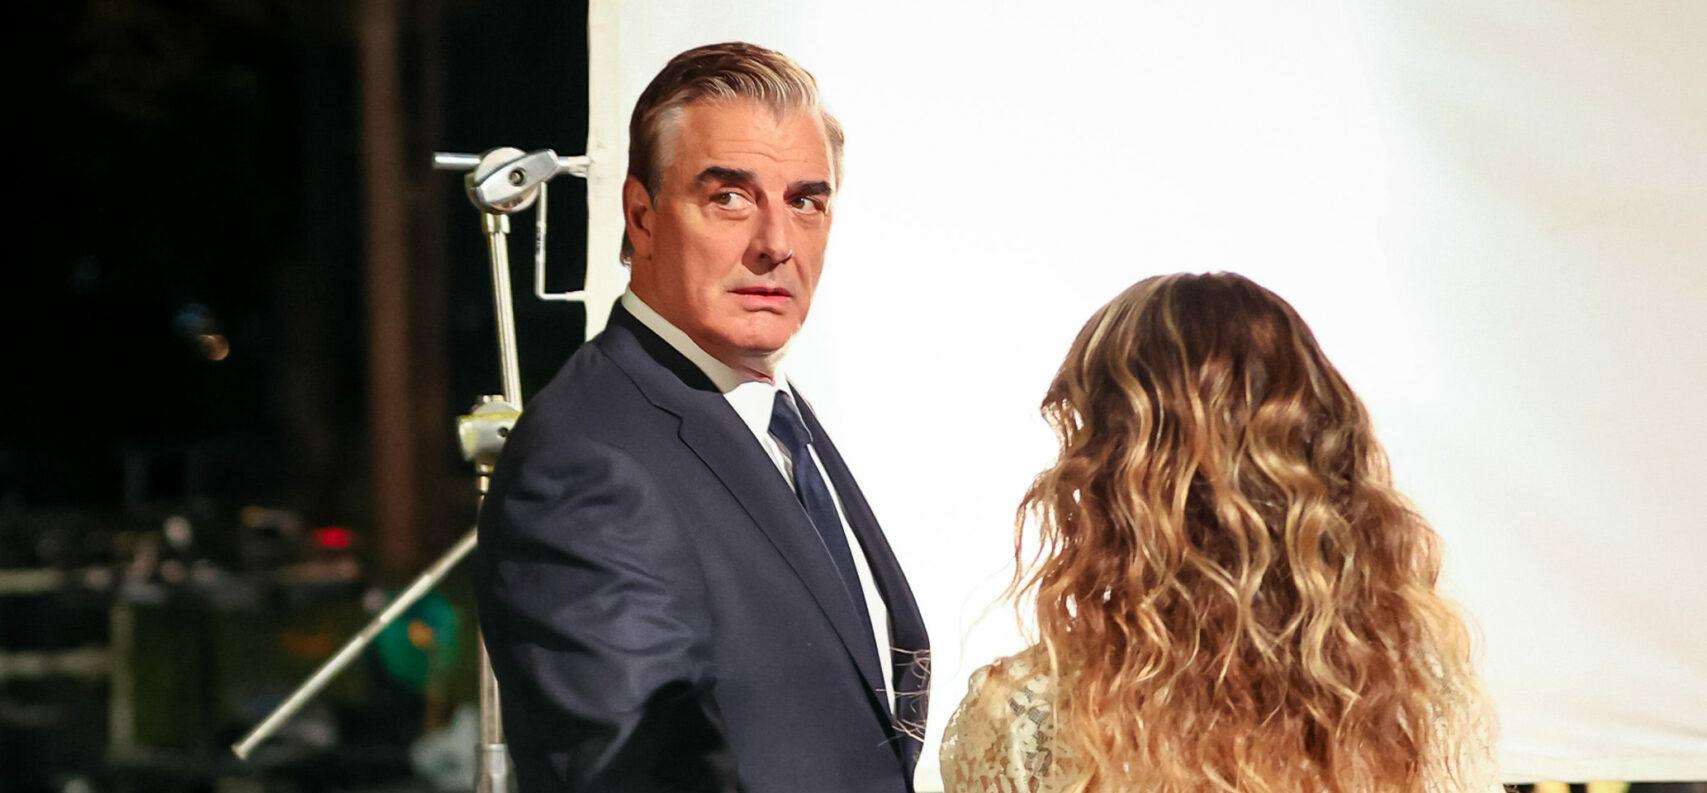 ‘SATC’ Star Christopher Noth: ‘I Did Not Assault These Women’